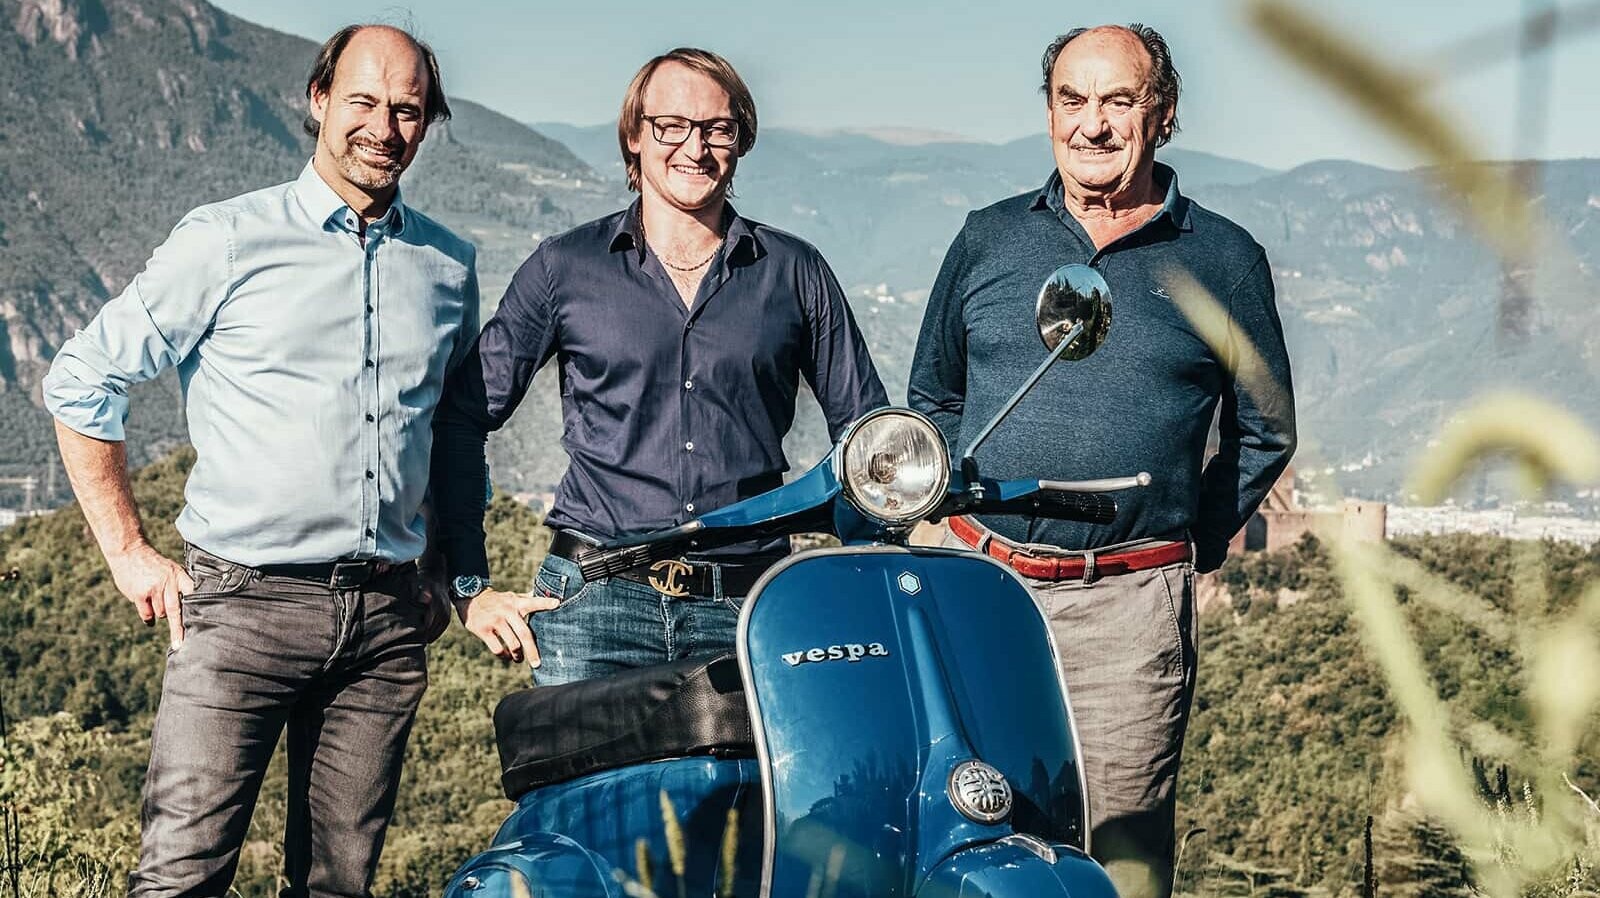 The 3 hotel professionals of the team from Planstudio Pedereiva. A blue Vespa can be seen in the foreground.